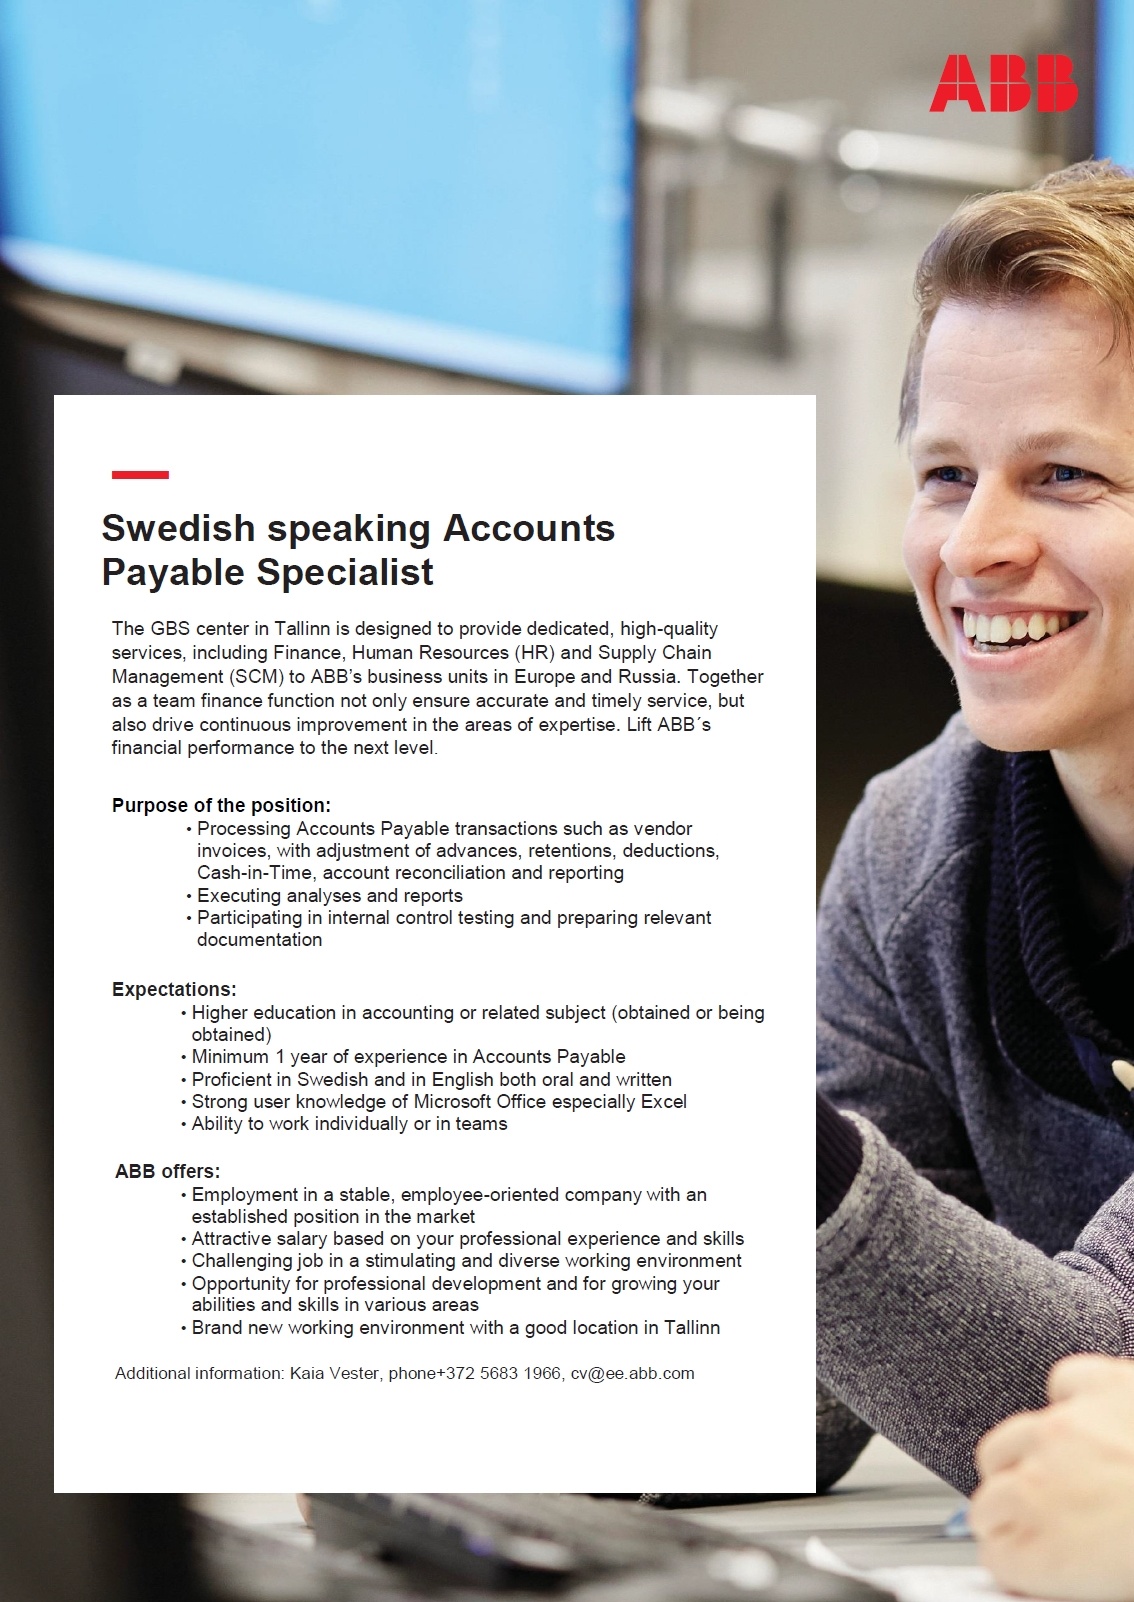 ABB AS Swedish speaking Accounts Payable Specialist